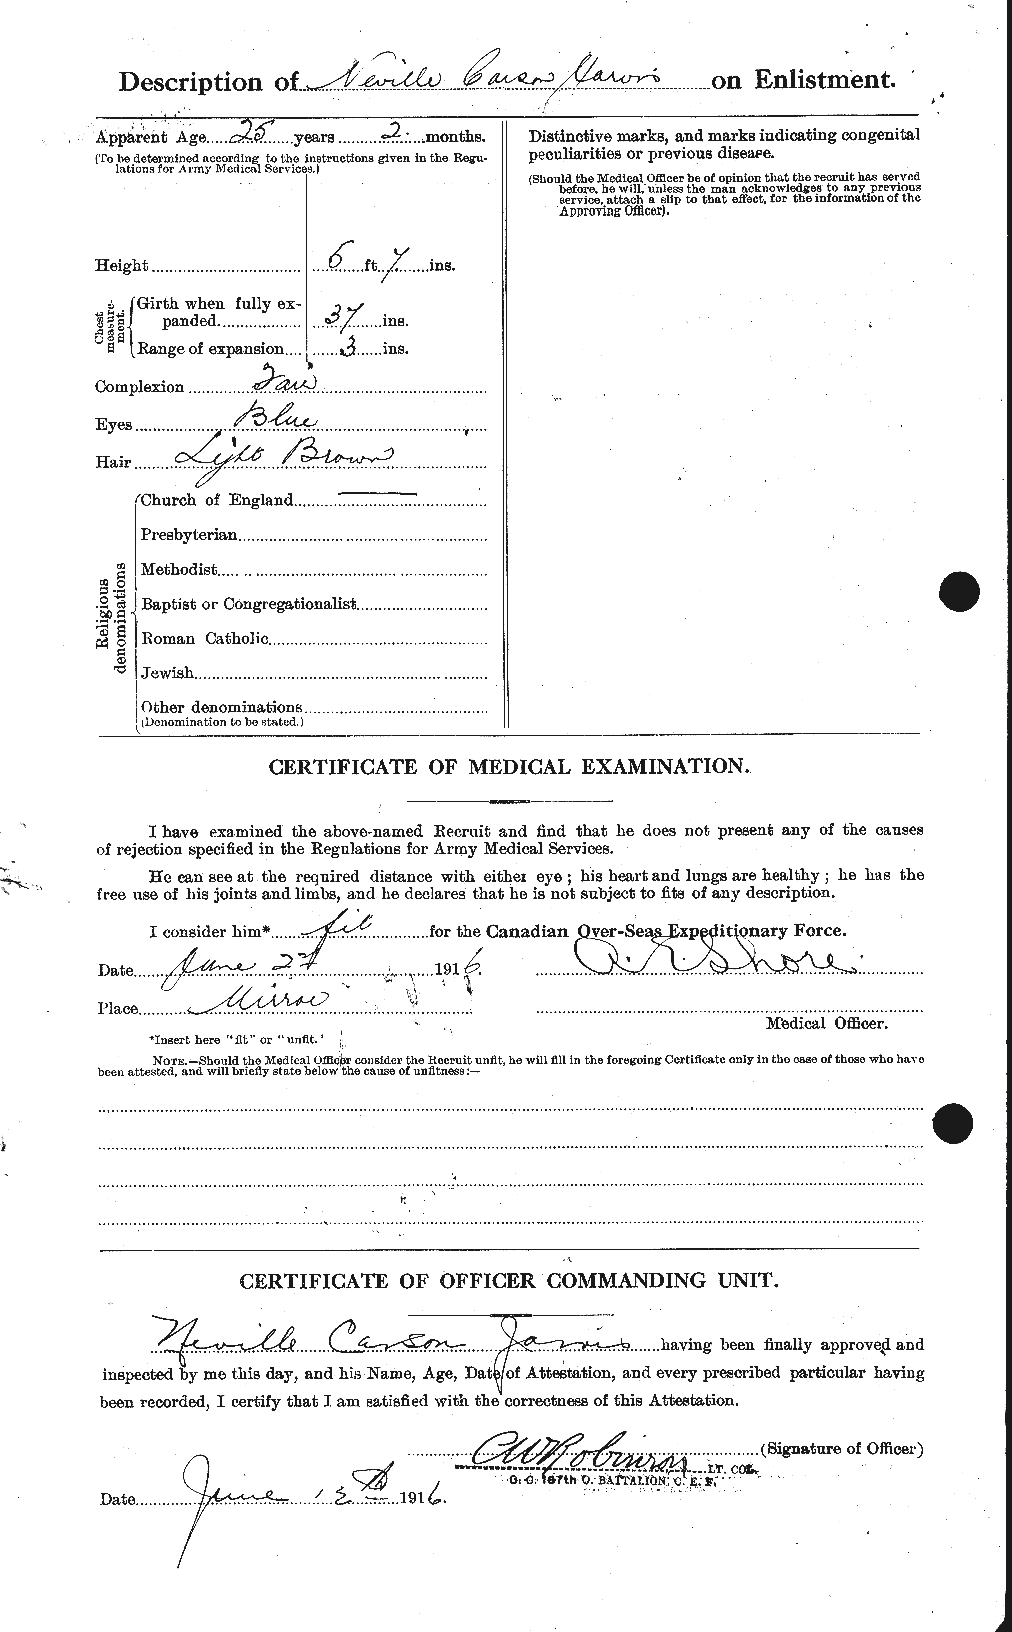 Personnel Records of the First World War - CEF 415840b